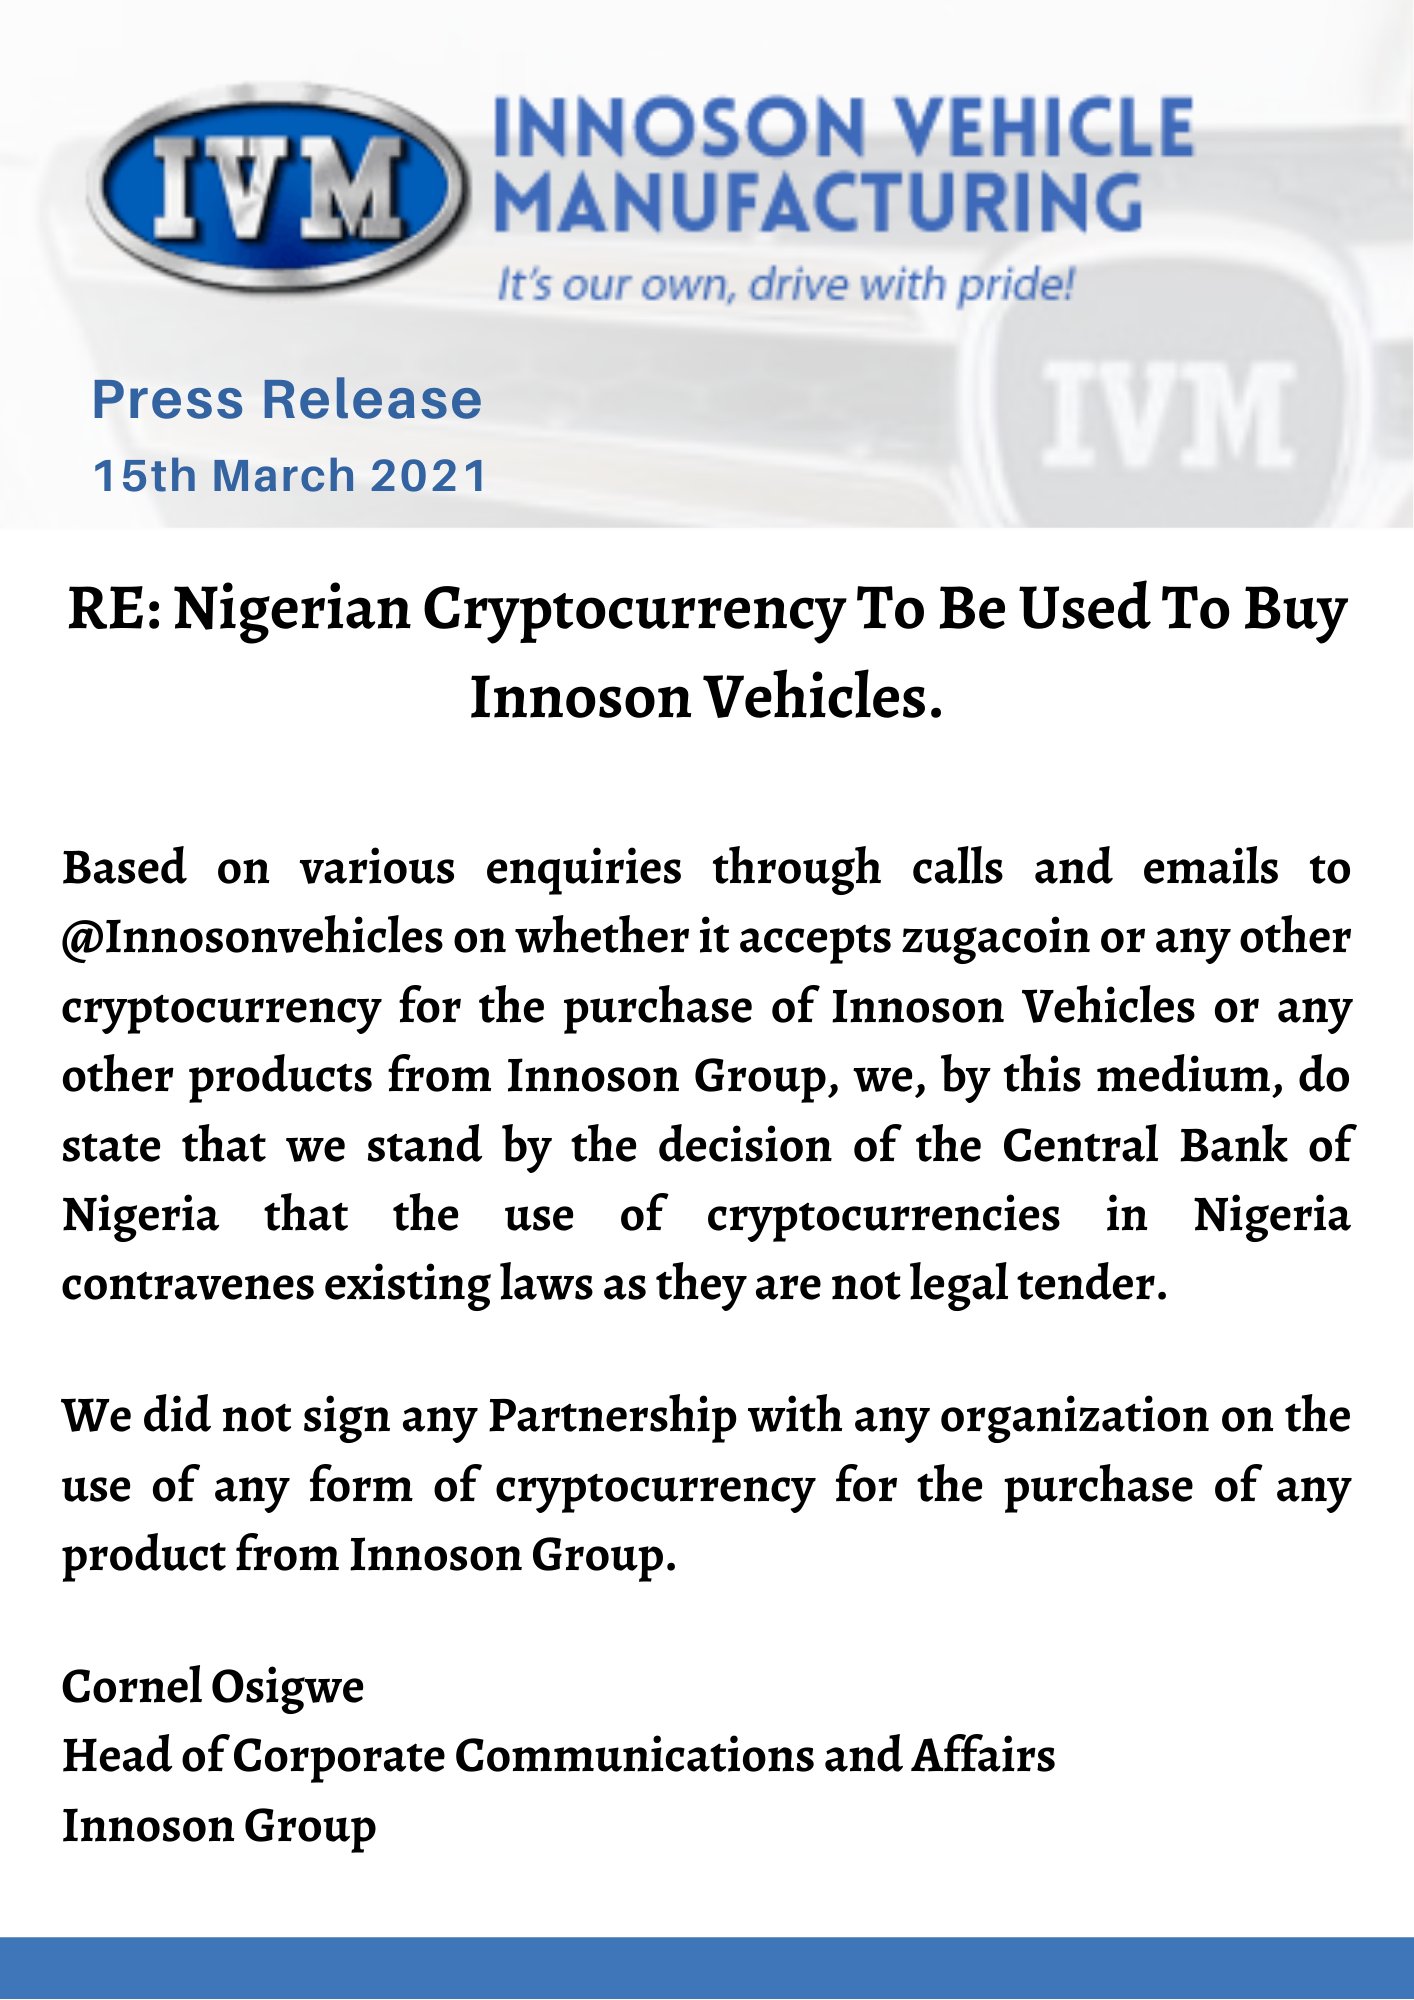 Innoson Motor Denies Partnership With cryptocurrency ...